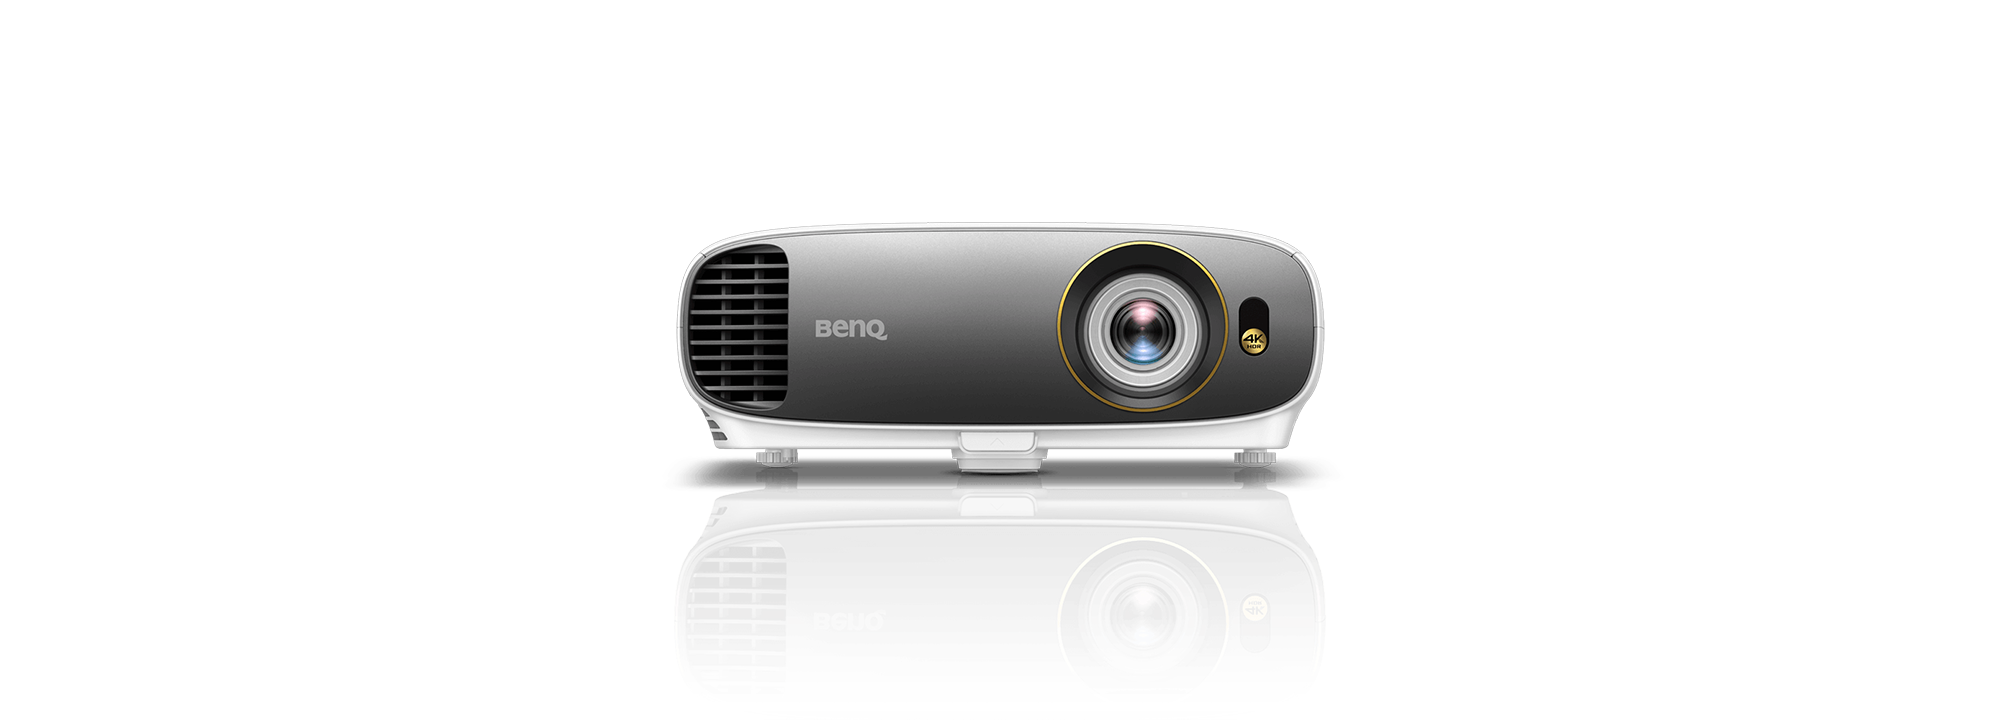 BENQ W1700 True 4K UHD Projector with HDR UHD, REC.709, and 1.2x Zoom